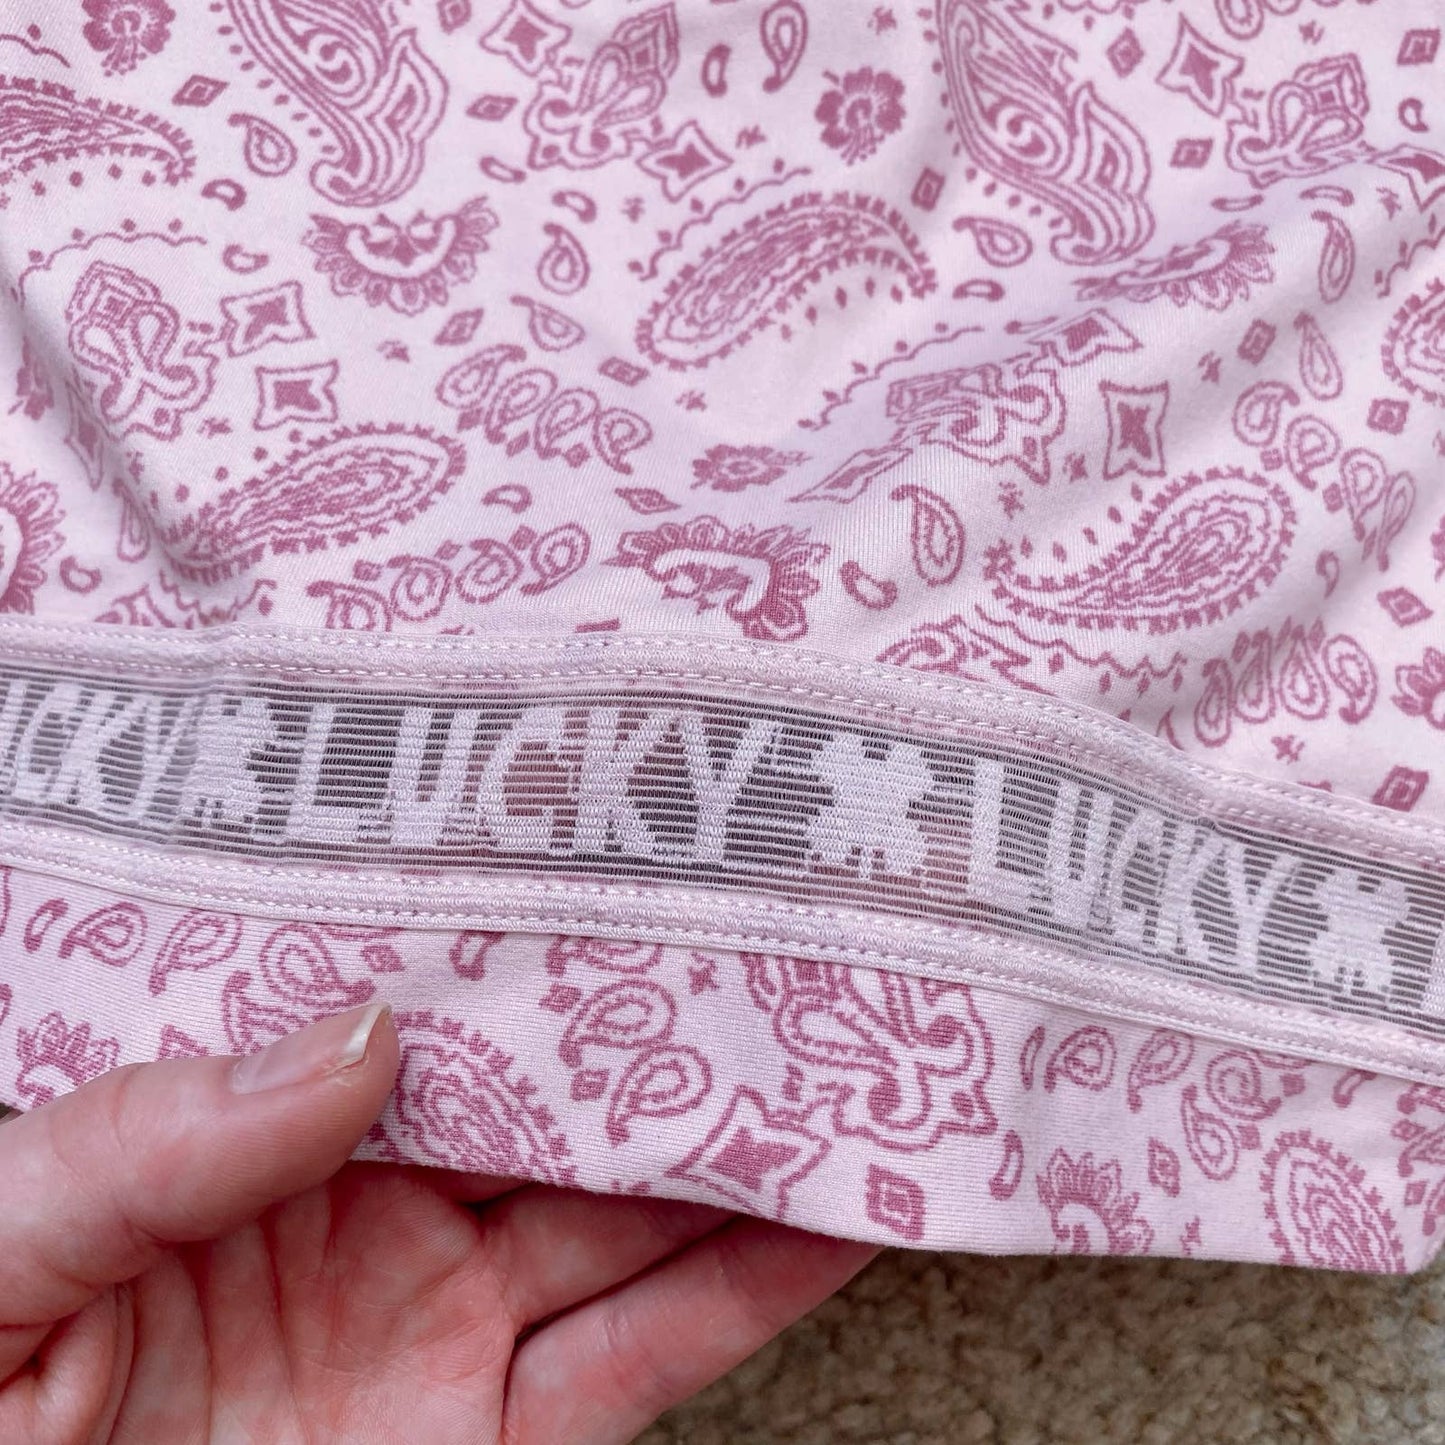 Secondhand Lucky Brand Pink Floral Logo Sports Bra, Size Large